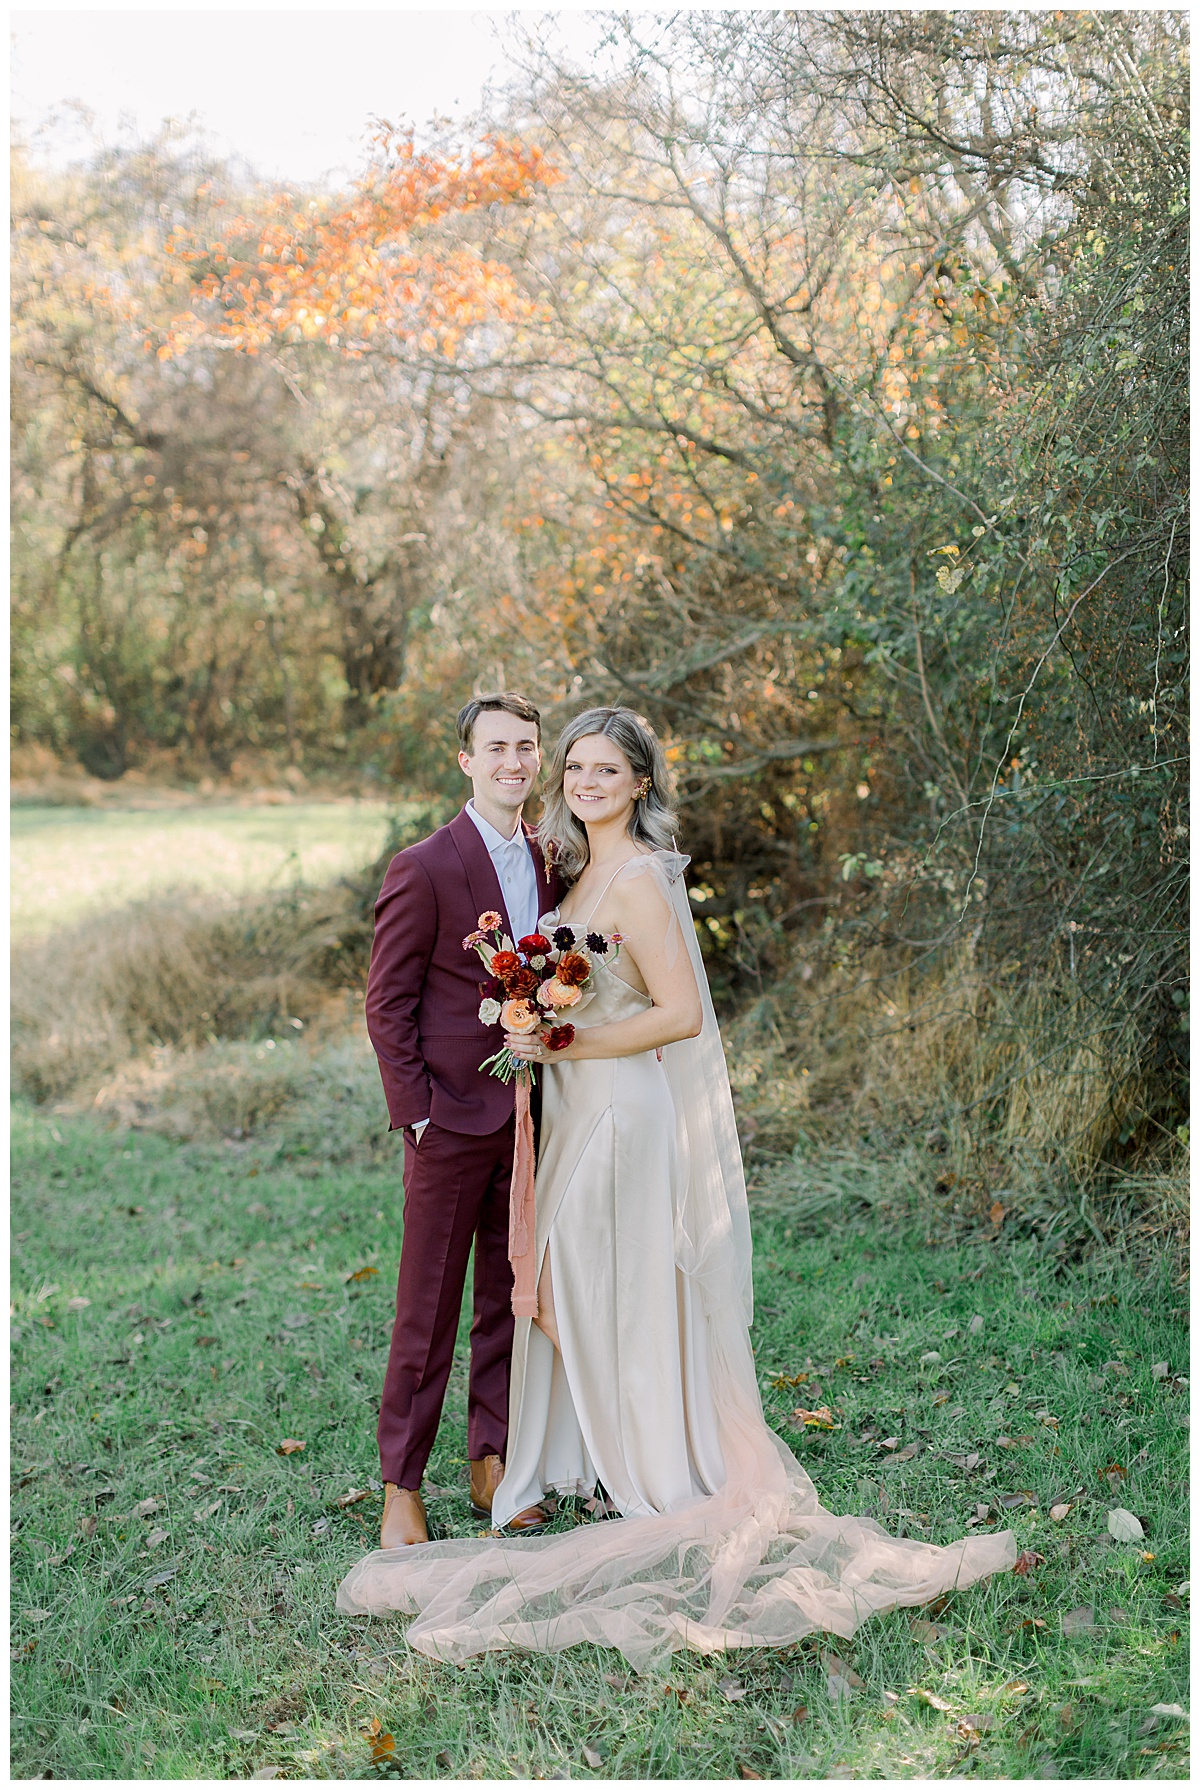 Margot and Johnny - A Charleston Covid Elopement | Candice Adelle Photography - Charleston Elopement Photographer_0059.jpg